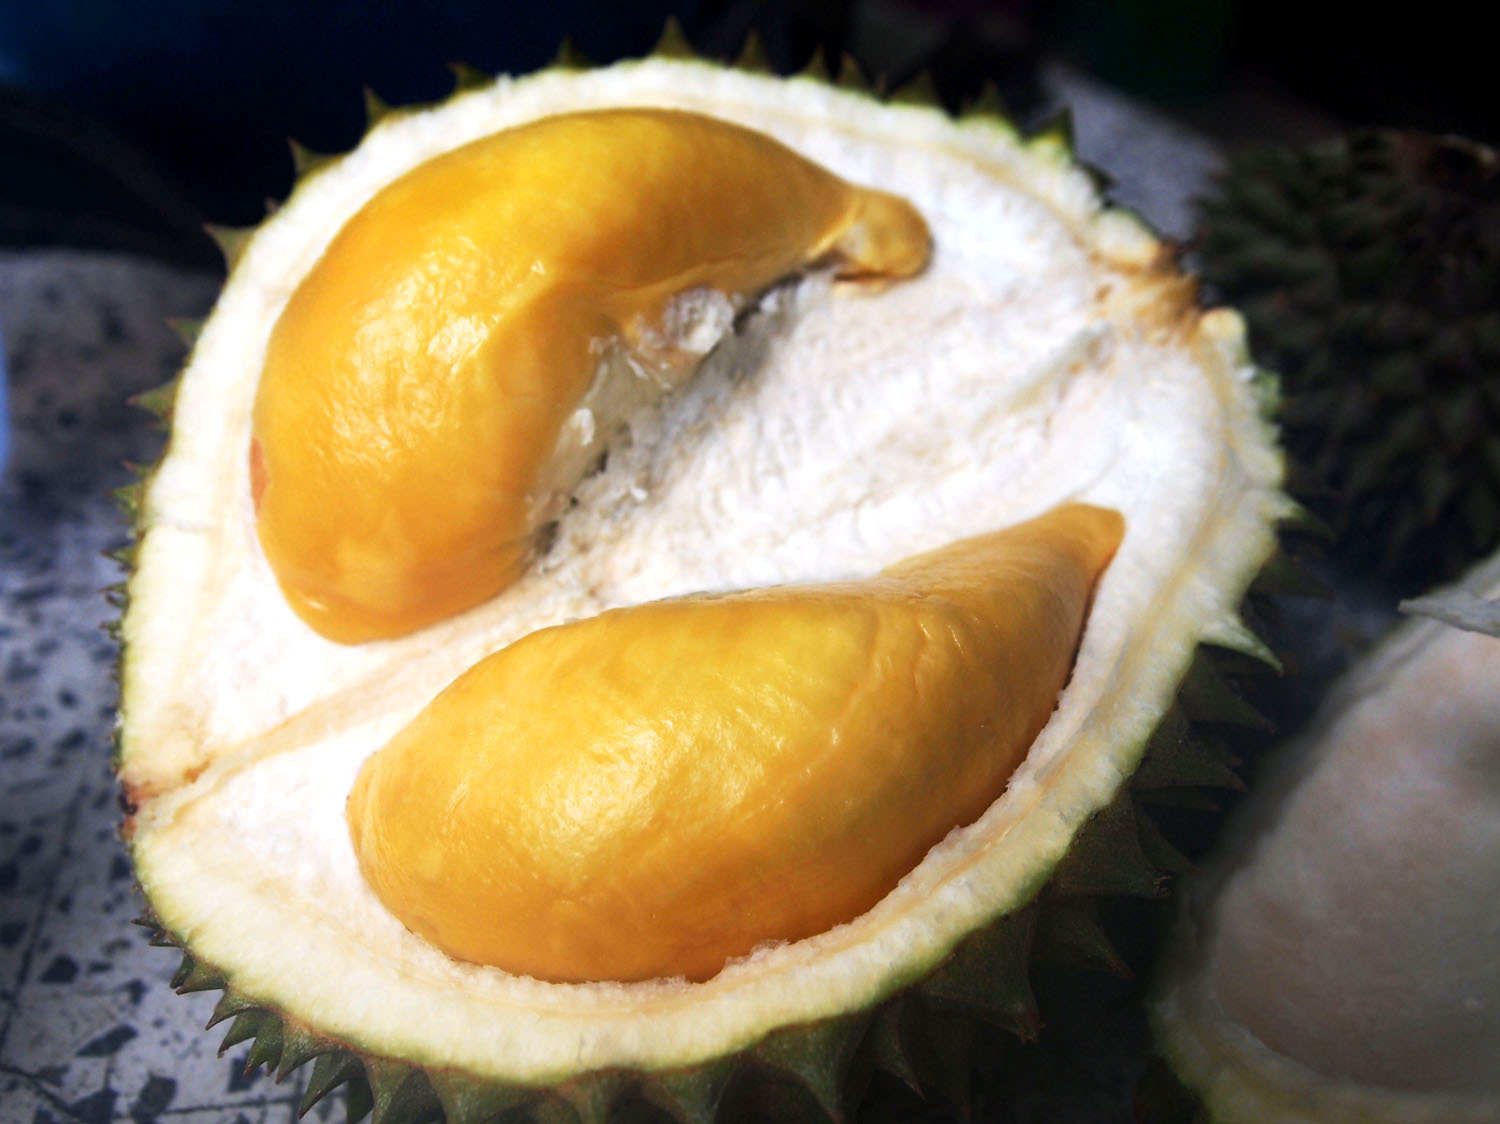 According to Gasik, the Puangmanee durian's flesh has "a smooth, chocolatey sensation." Courtesy of Lindsay Gasik